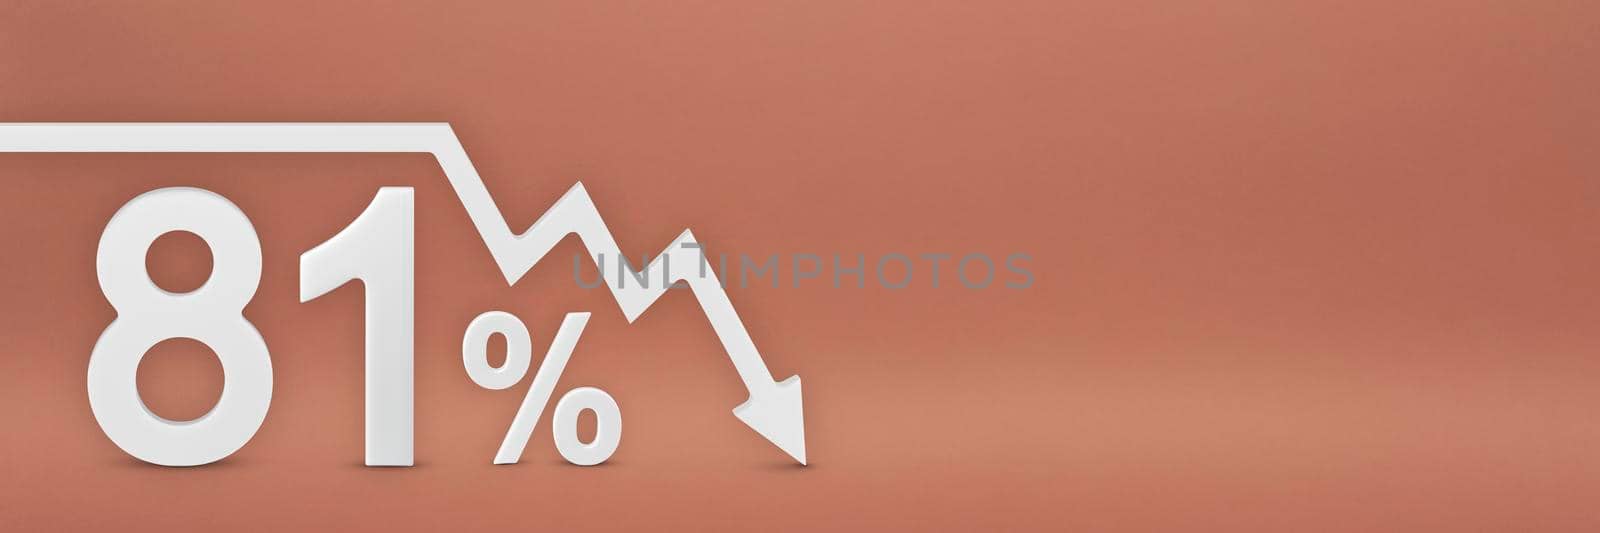 eighty-one percent, the arrow on the graph is pointing down. Stock market crash, bear market, inflation.Economic collapse, collapse of stocks.3d banner,81 percent discount sign on a red background